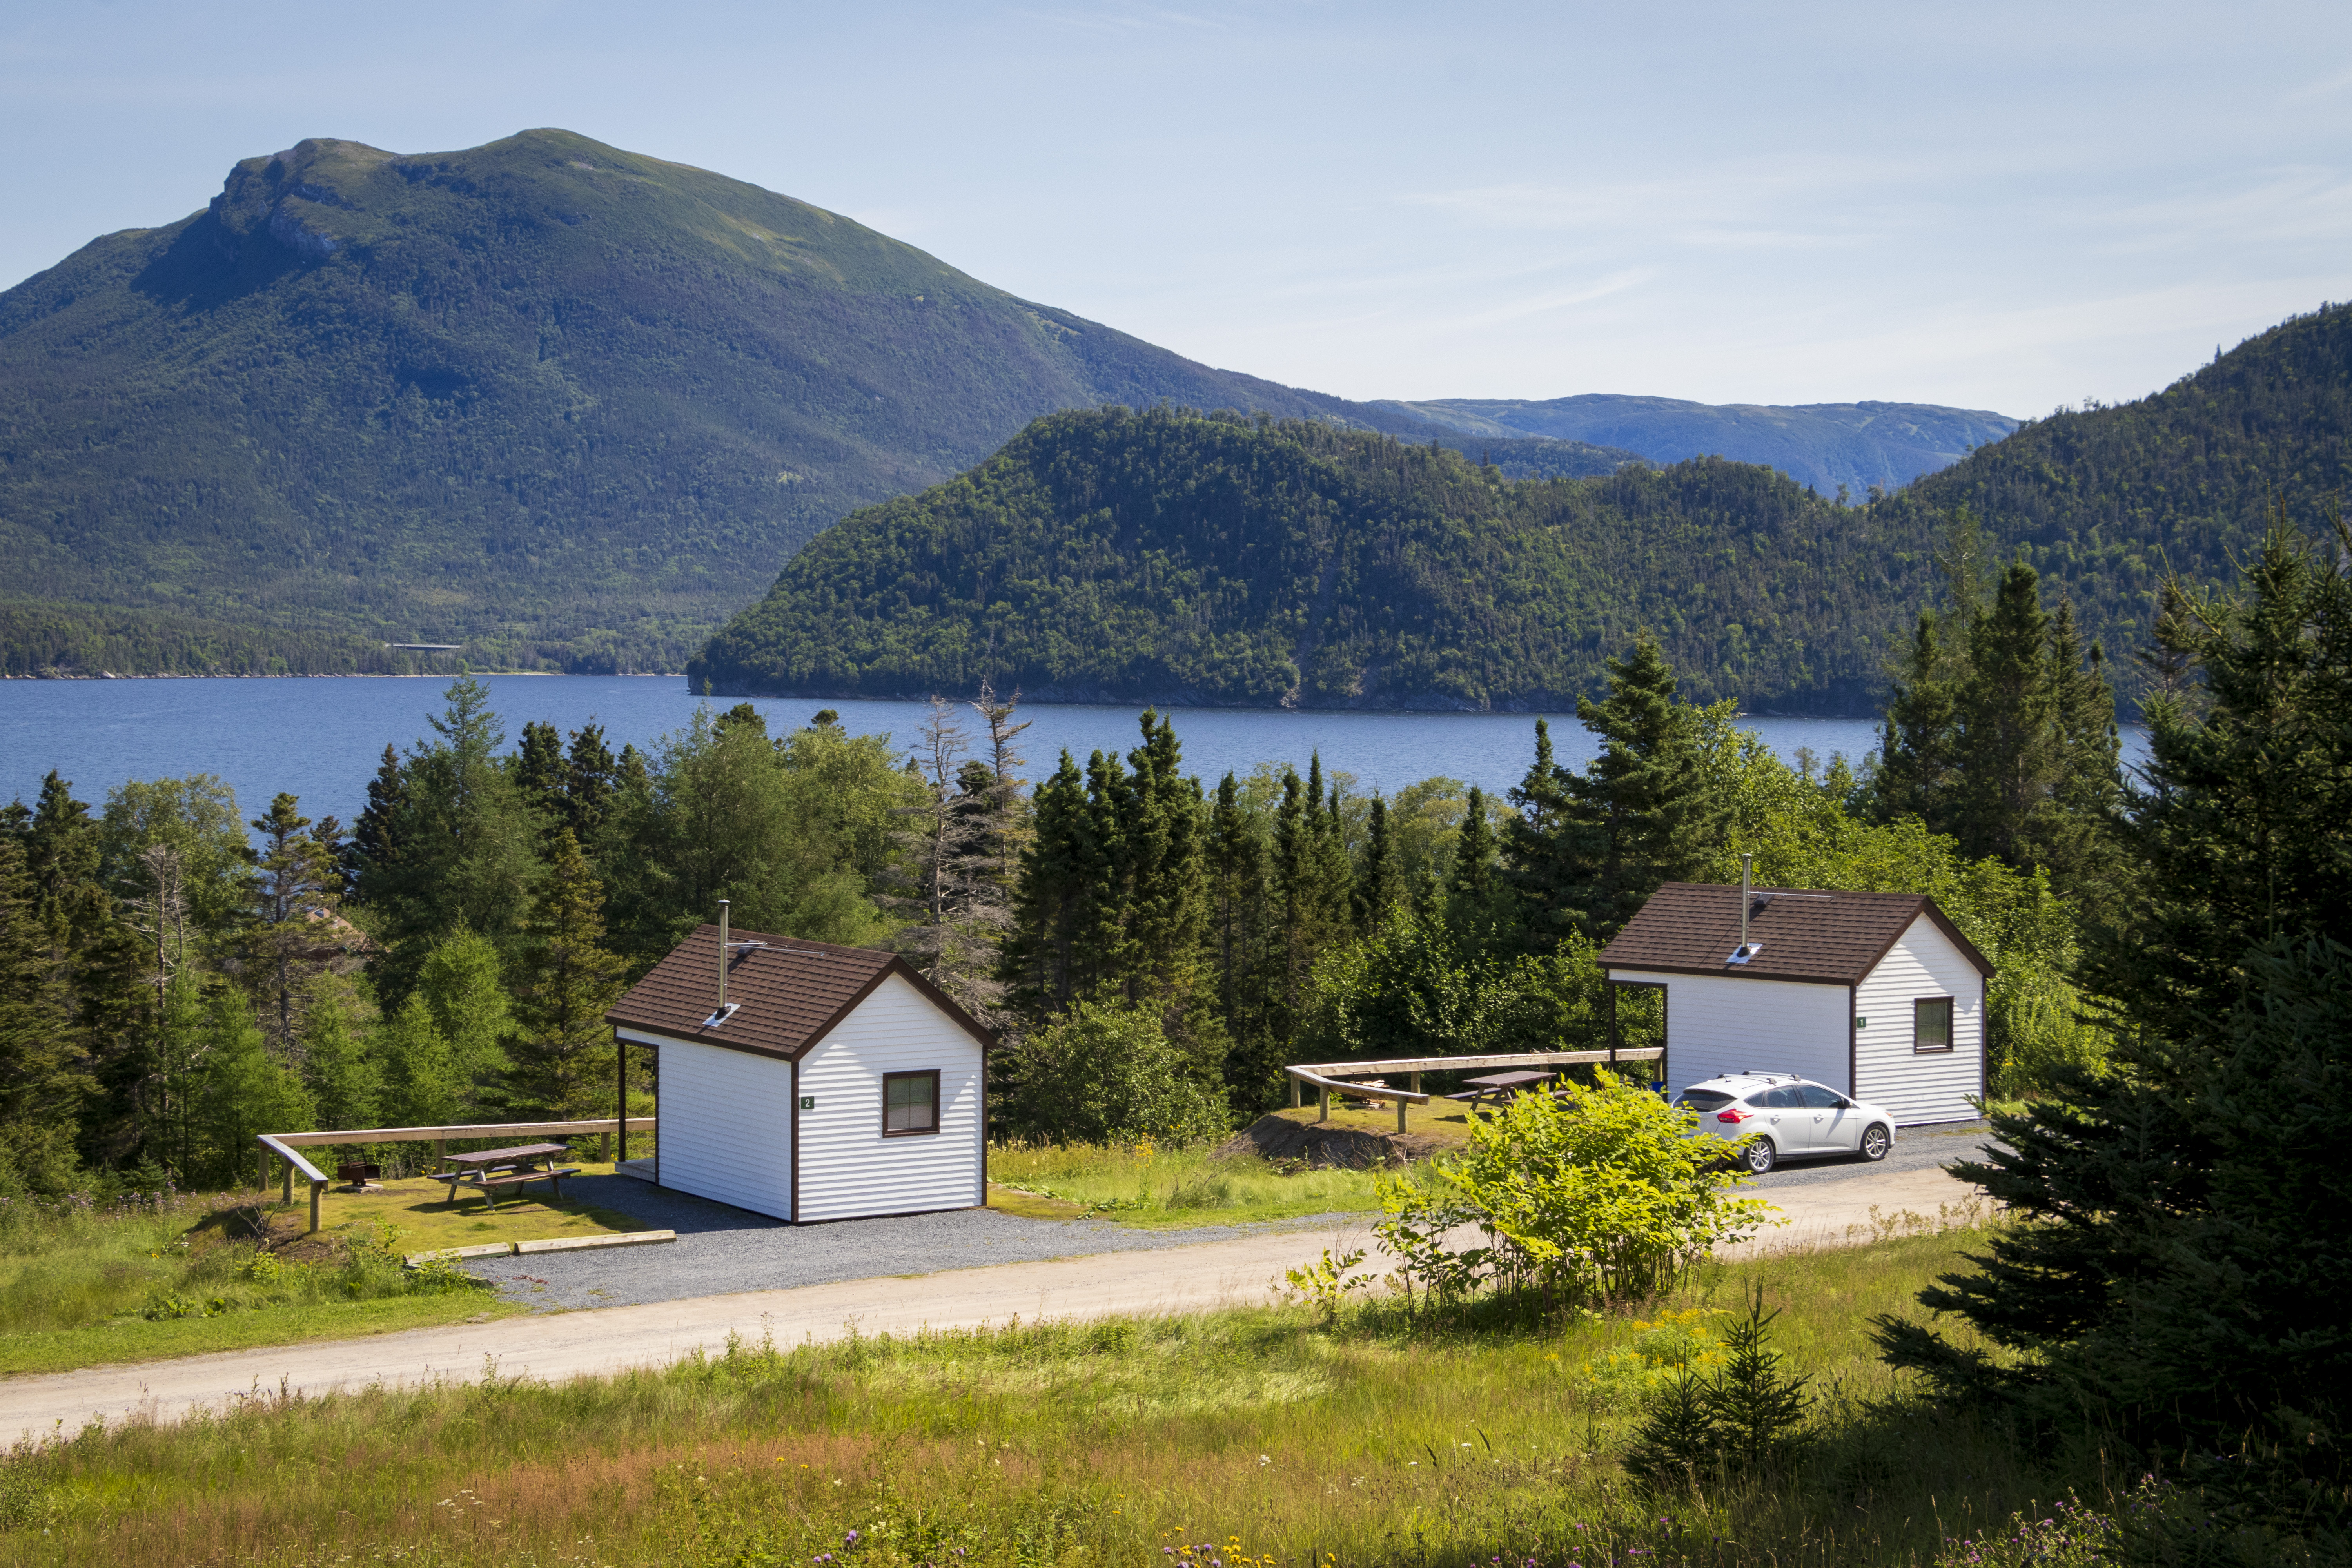 View of the two tiny cabins overlooking Lomond in Gros Morne National Park